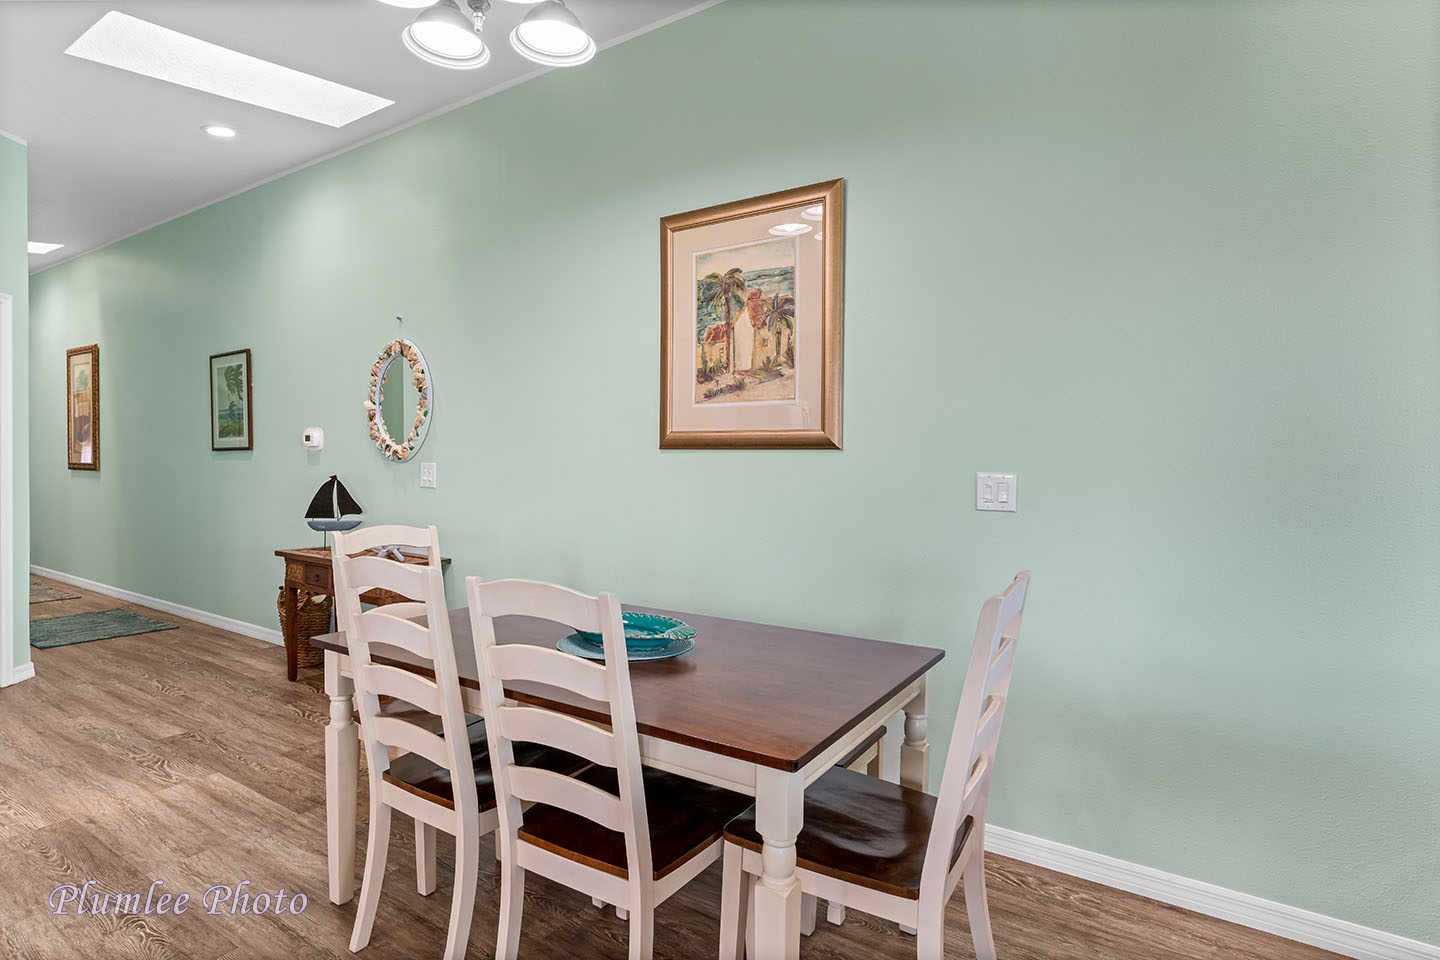 Dining area for family meals or game night!